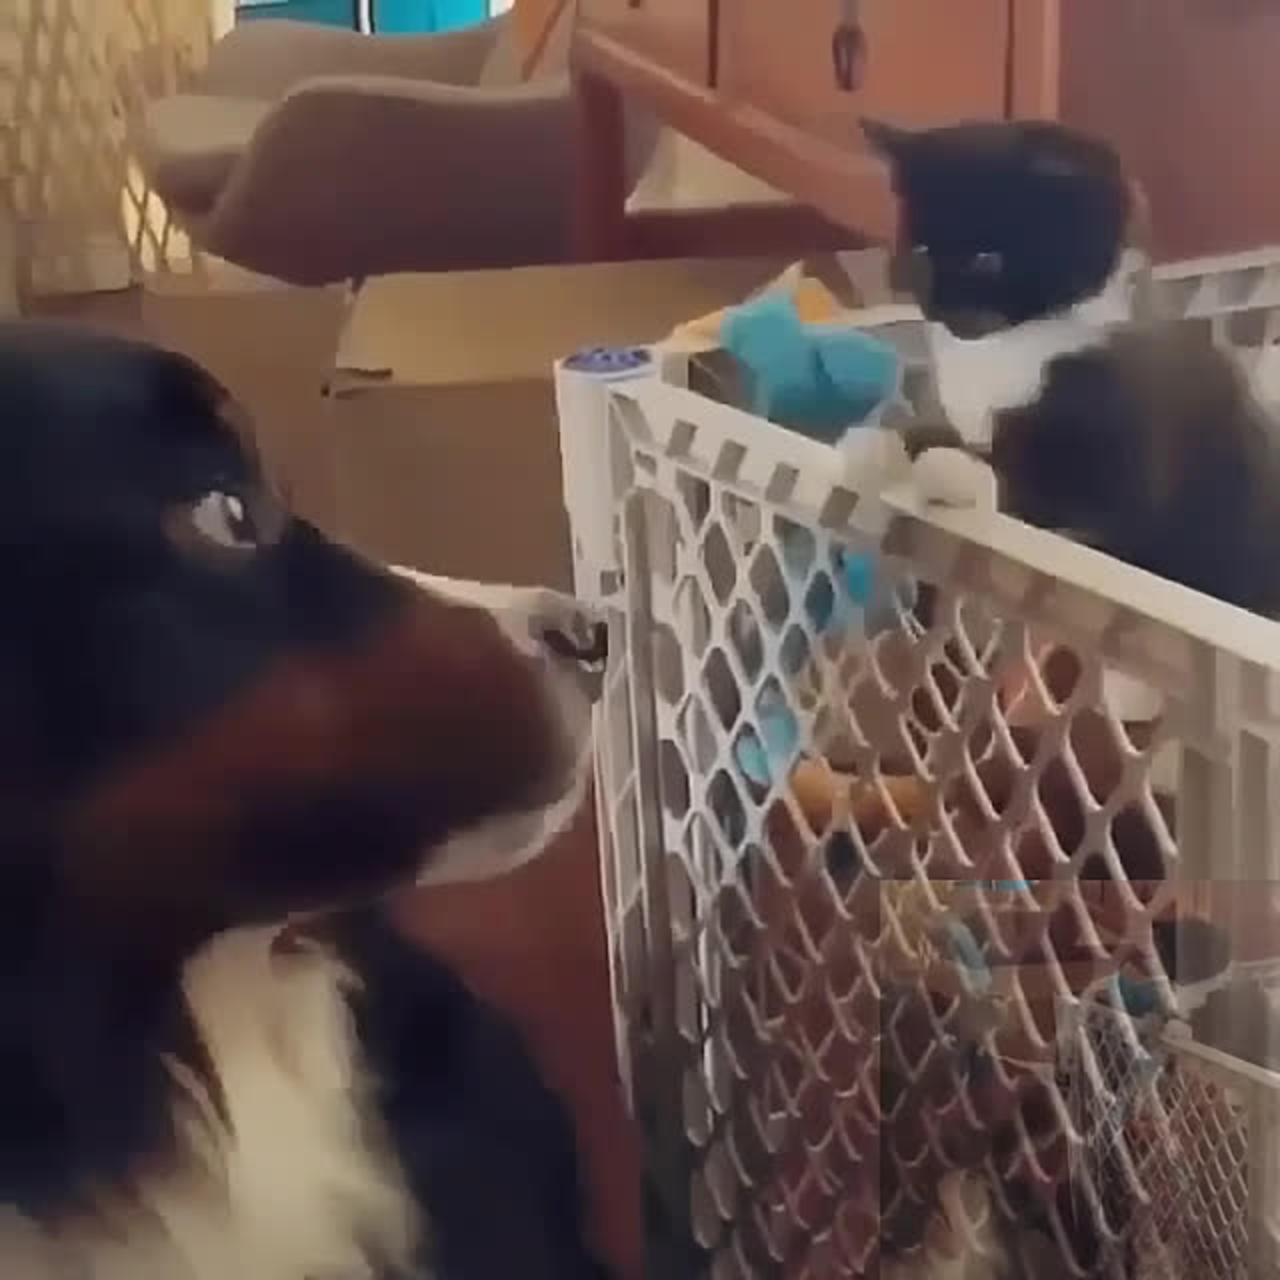 The cat hit the dog